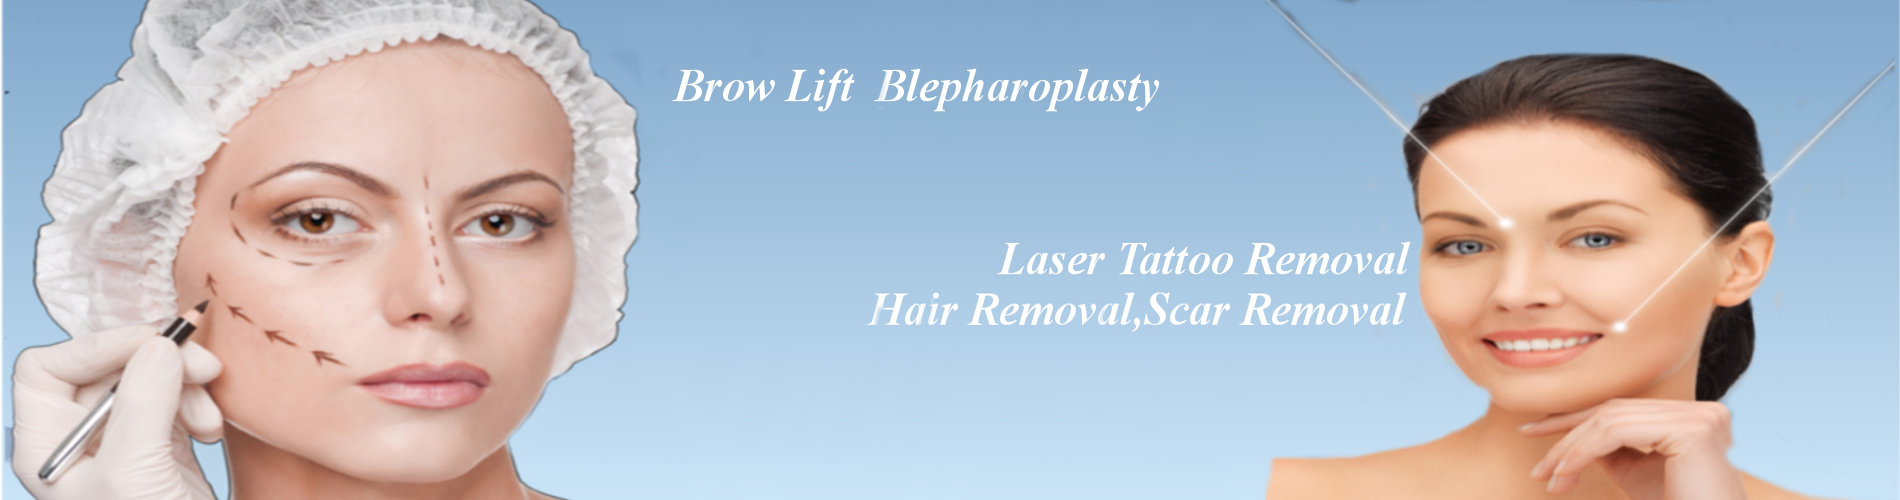 Brow lift laser tatto removal hair removal scar removal